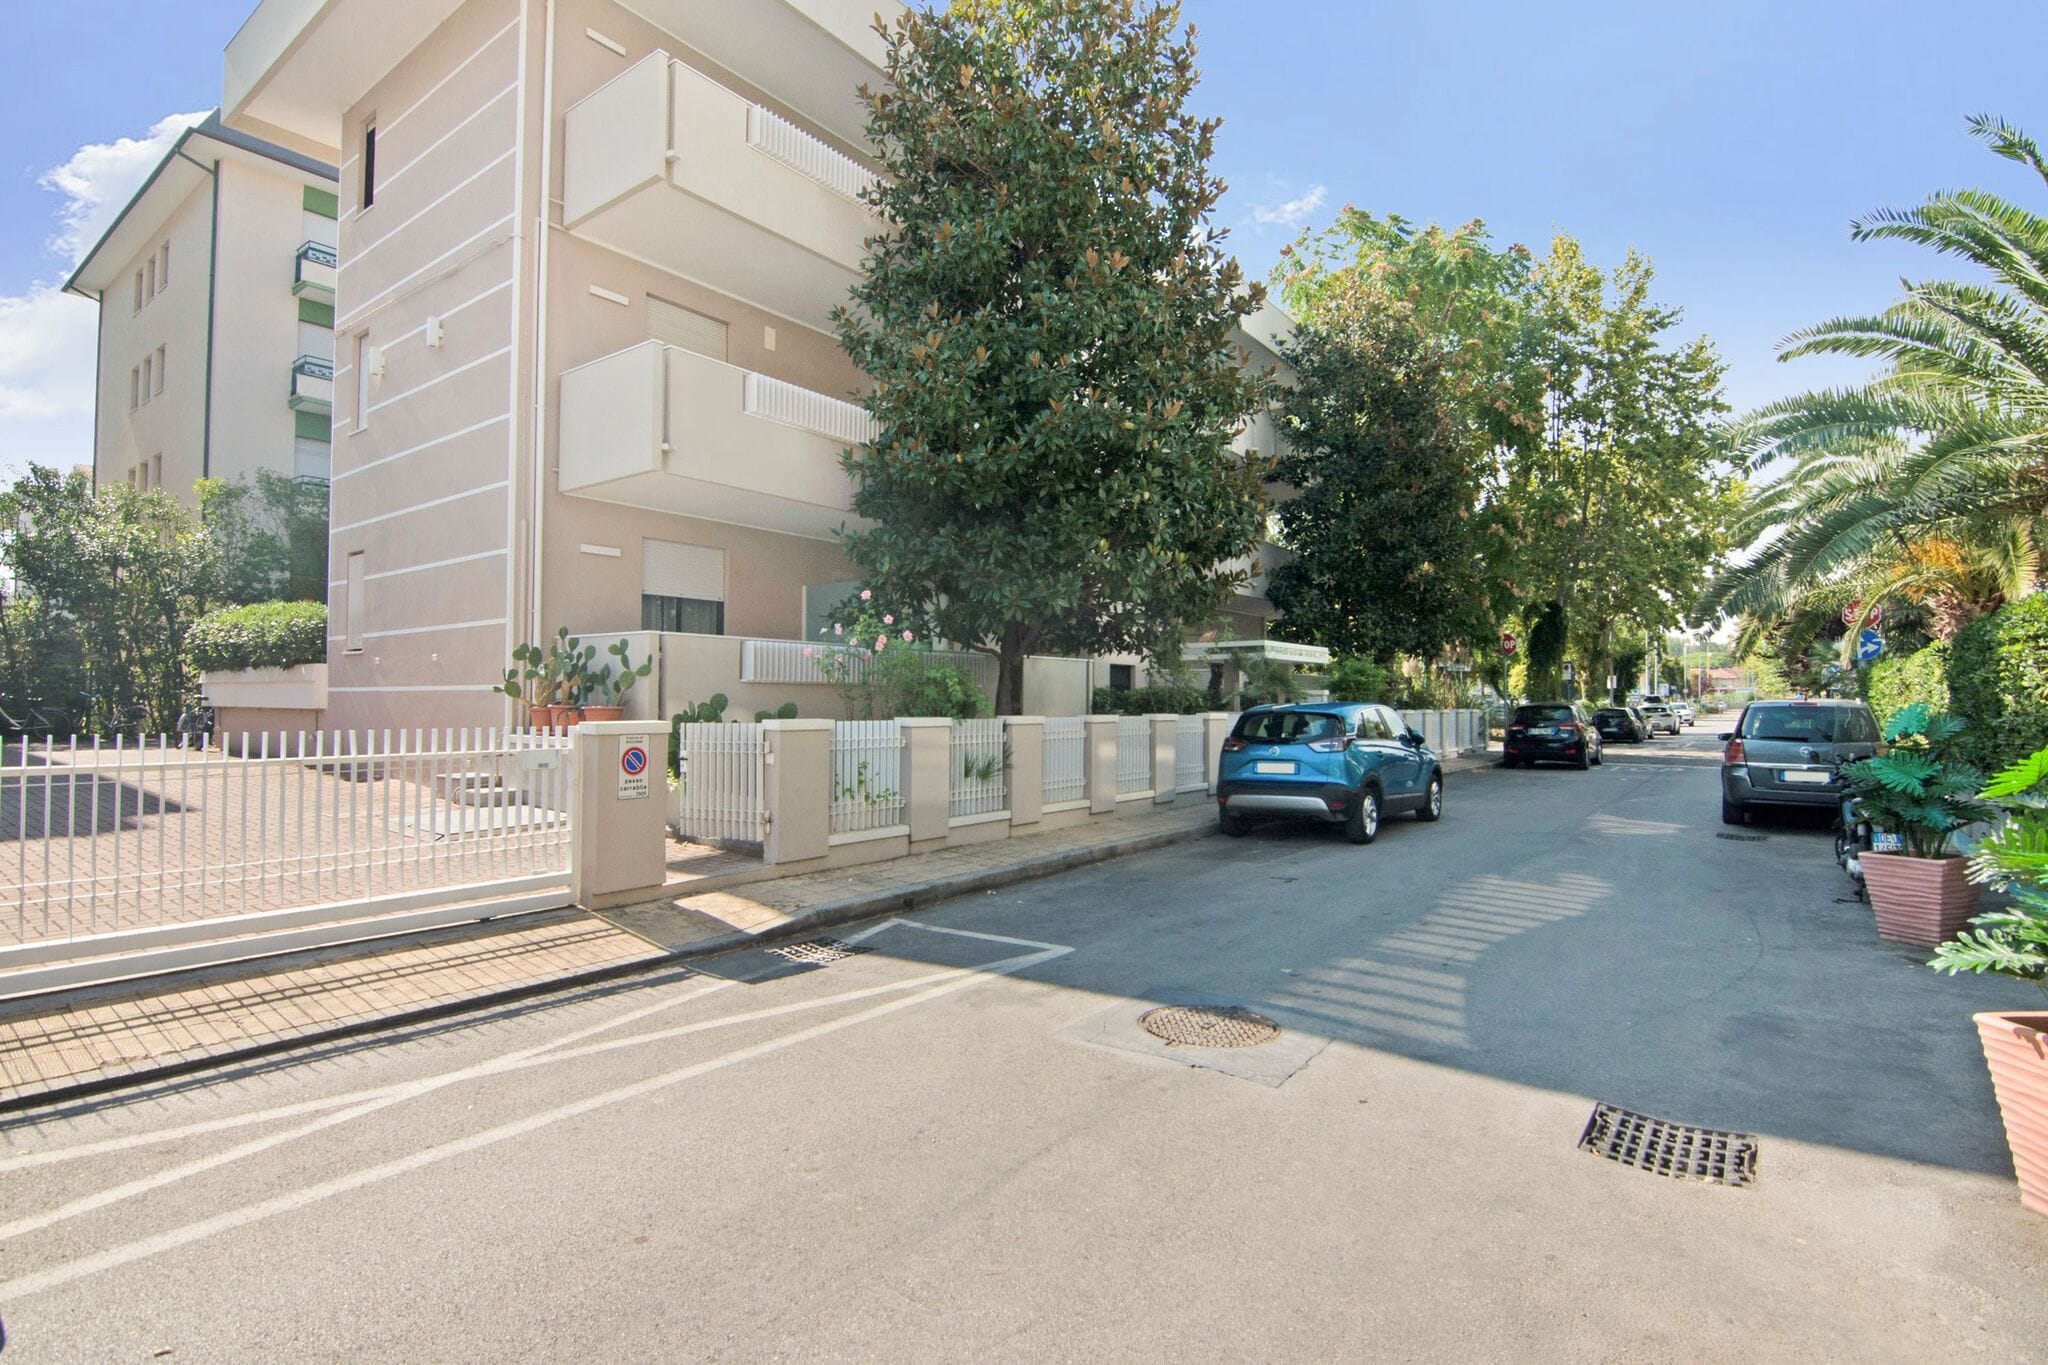 Apartment in northern zone of Riccione, 150 meters from the sea.